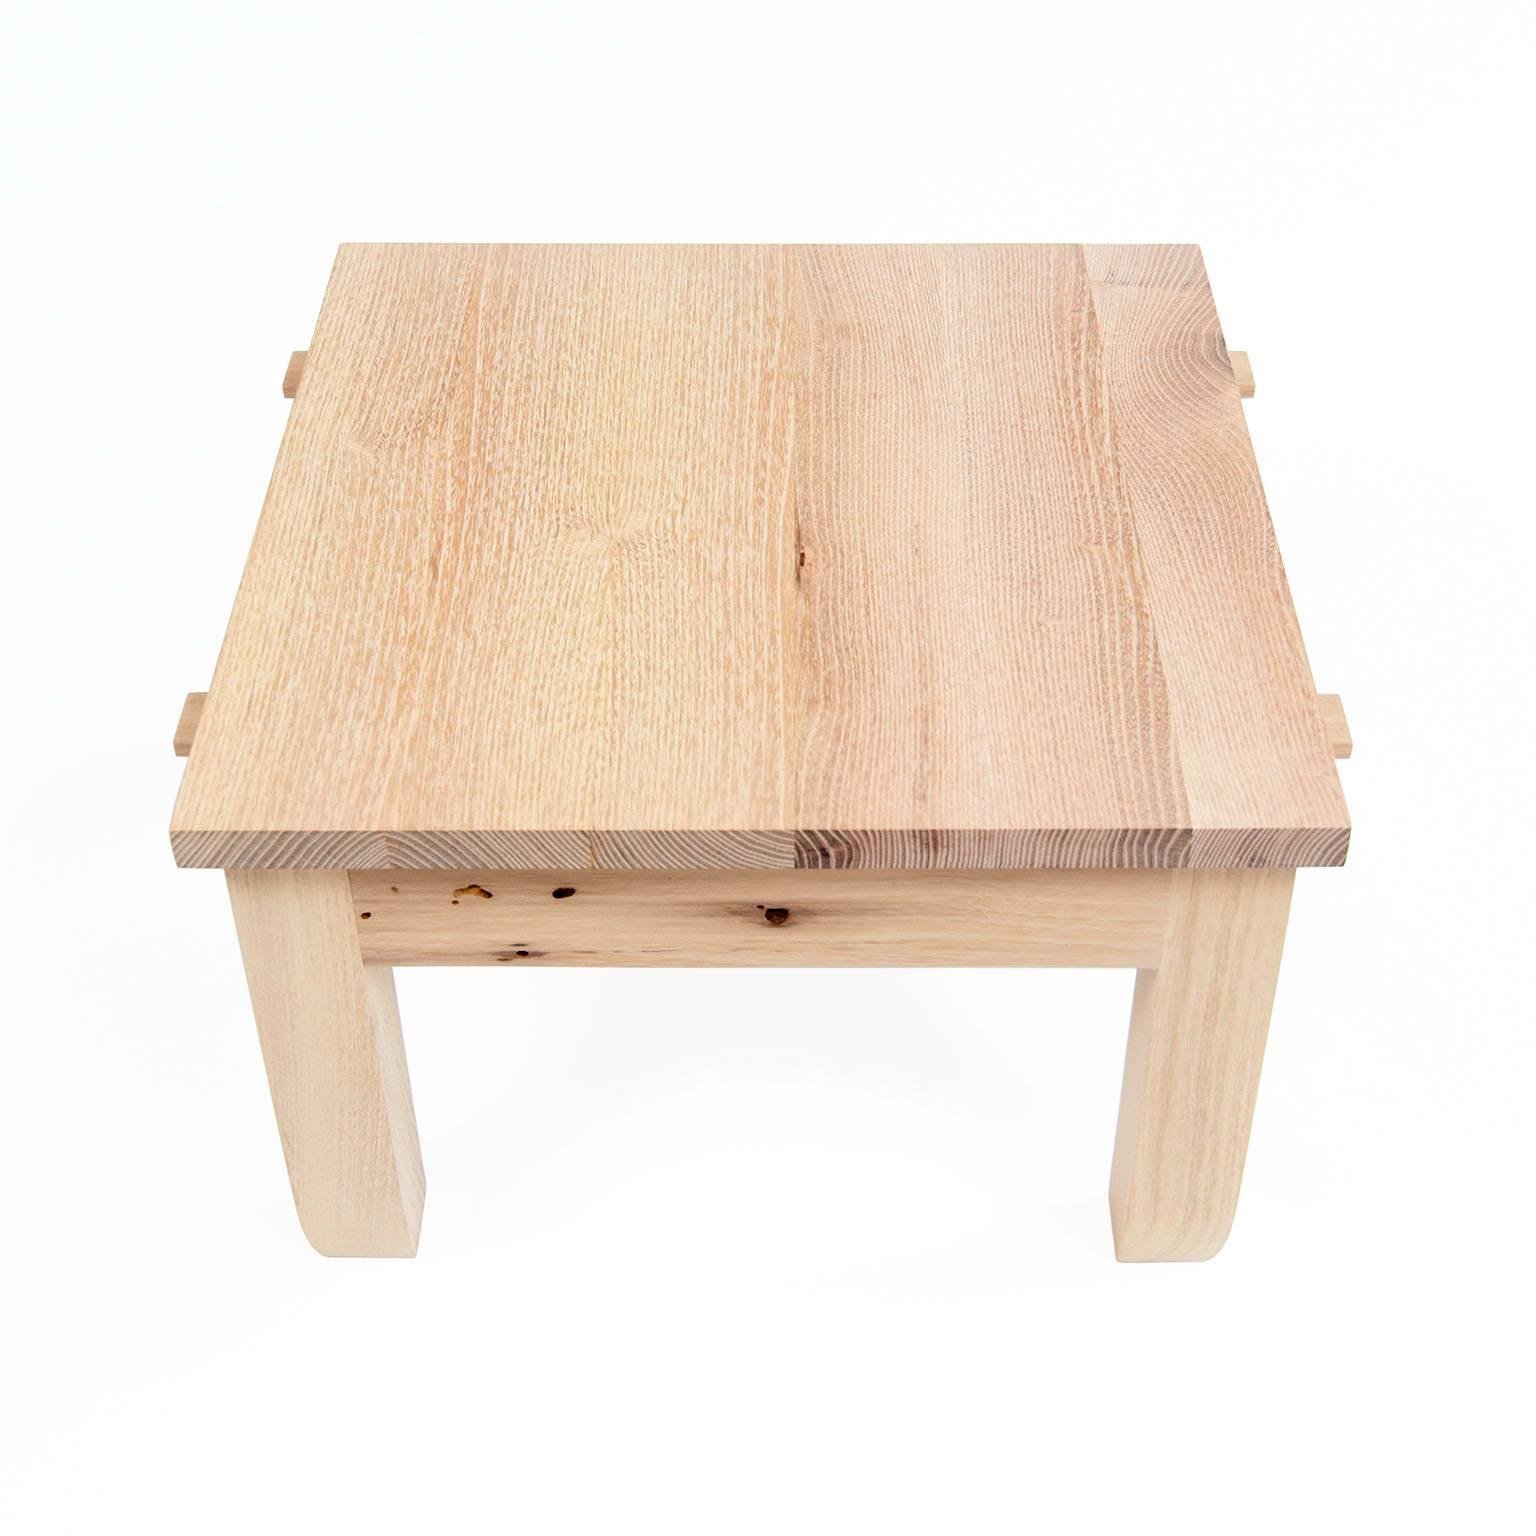 Prayer stool 011
black locust
Measures: 17 square x 11 high
no finish
2017

As always-one step up towards reaching your inner goals or your upper shelves. The perfect front hall shoe bench, plant stand, luggage rack-this prayer stool in local